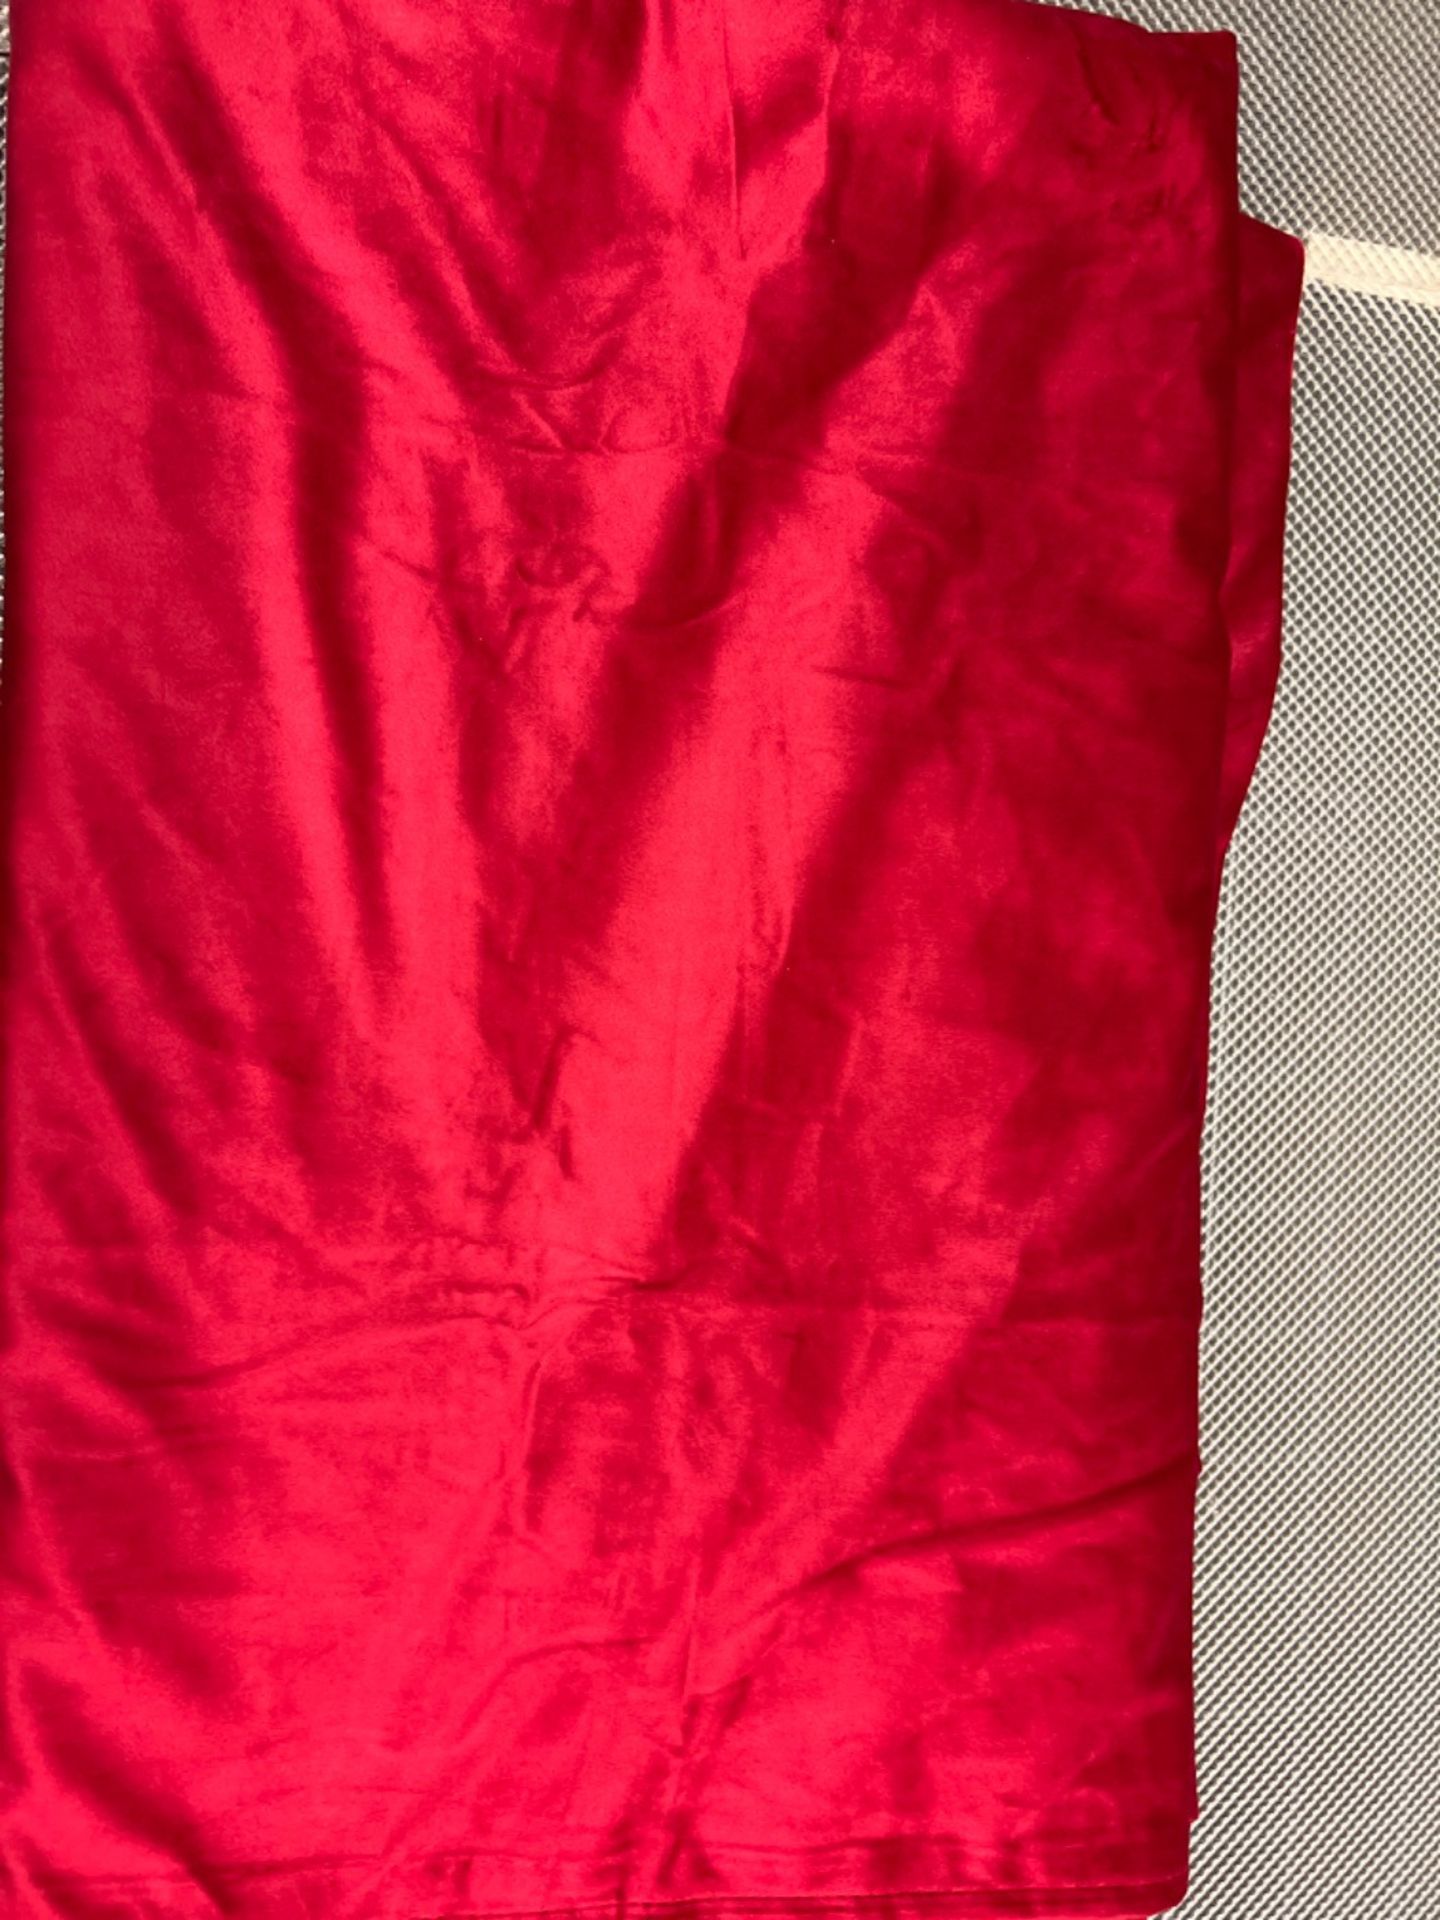 StangH Room Darkening Curtains Red - Extra Wide 120 inches Long Theater Velvet Drapes for Display W - Image 3 of 3